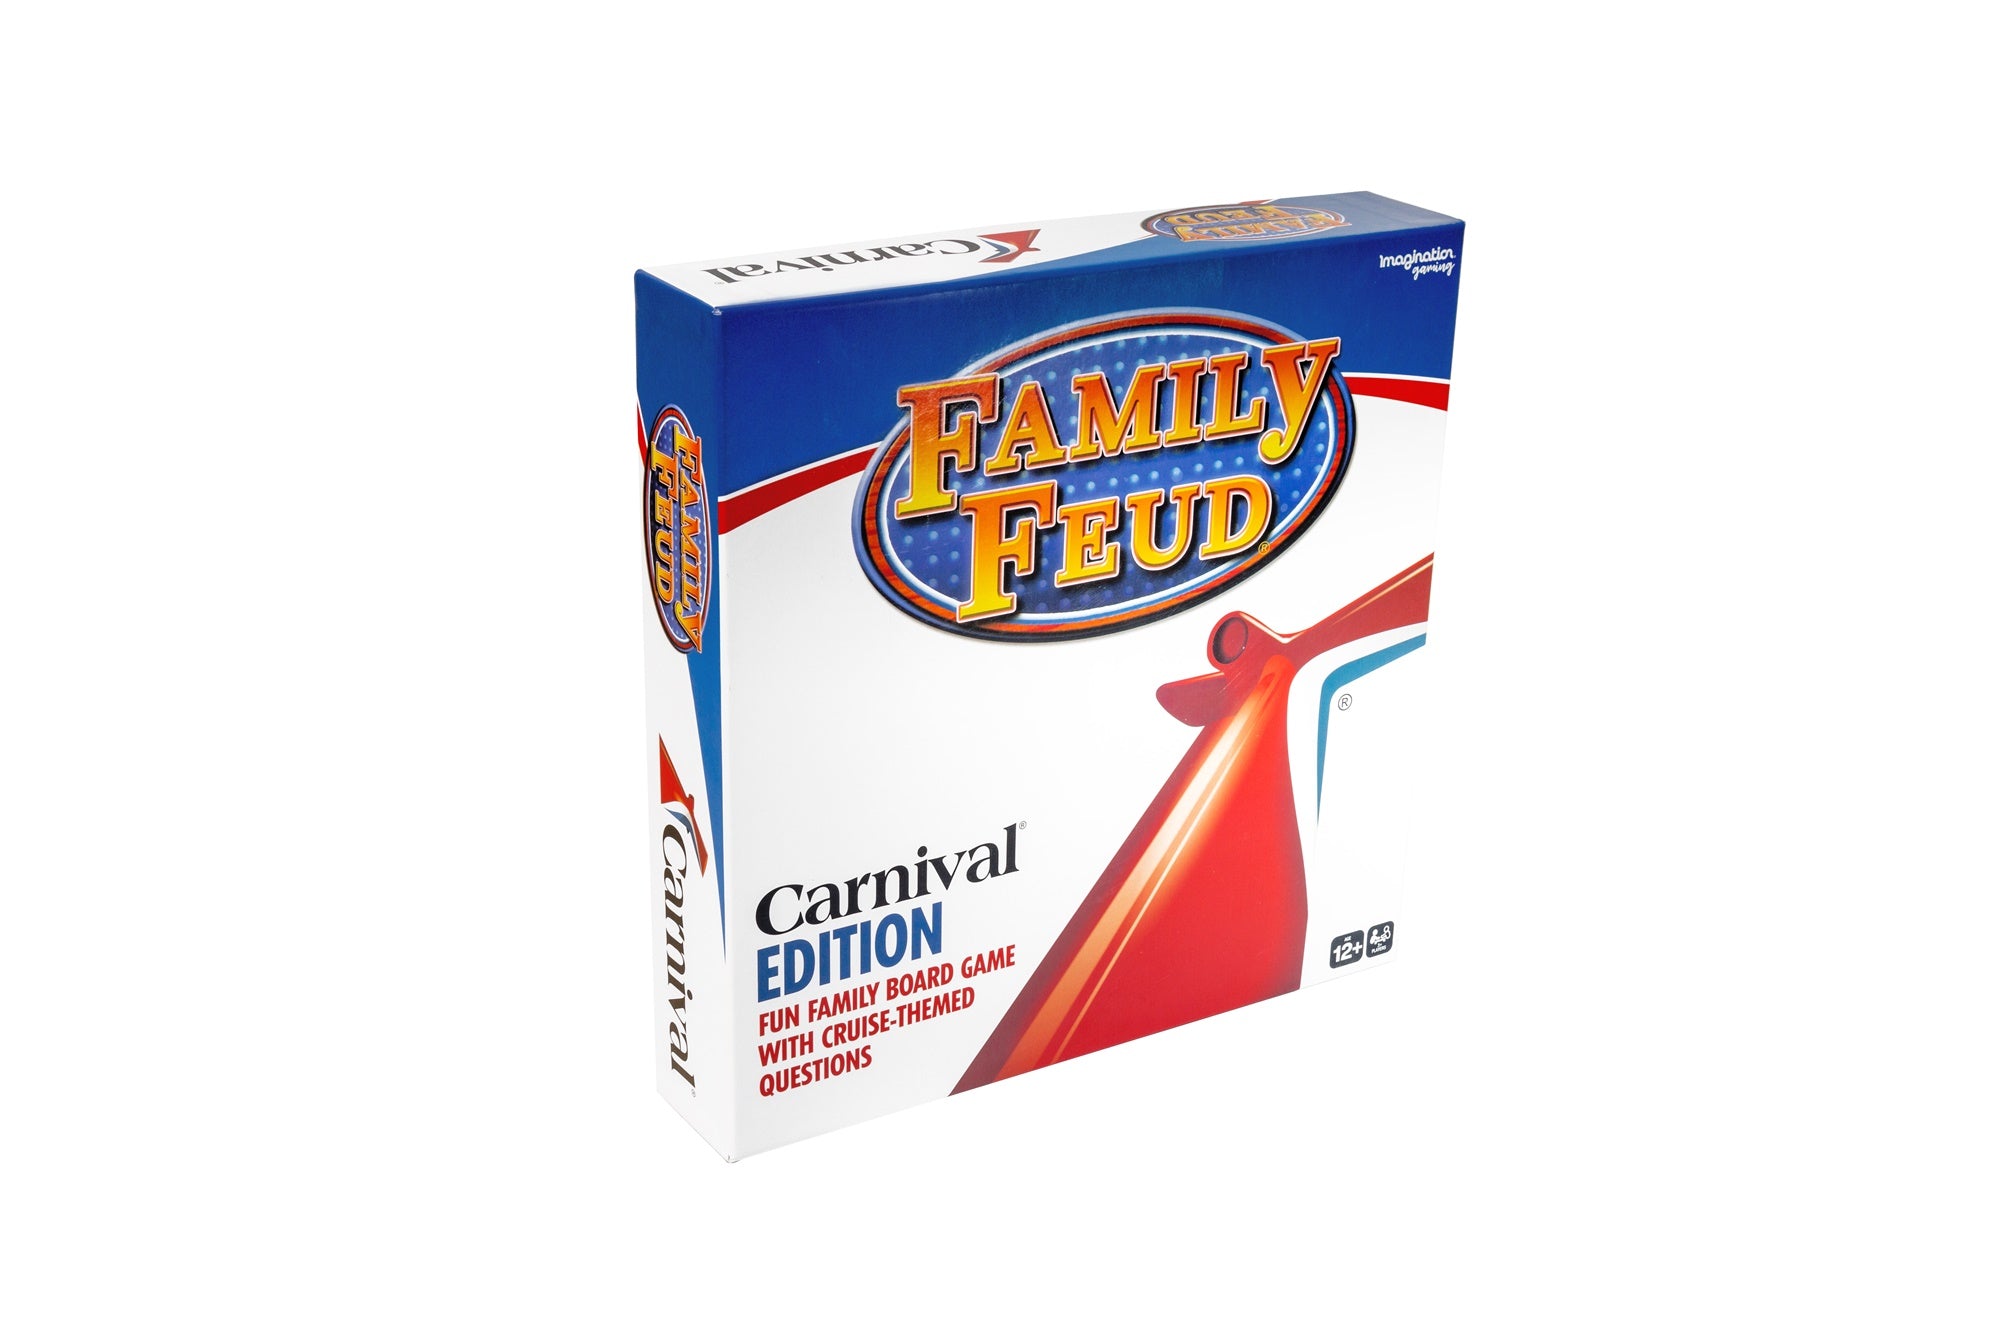 Family Feud Carnival Edition Box